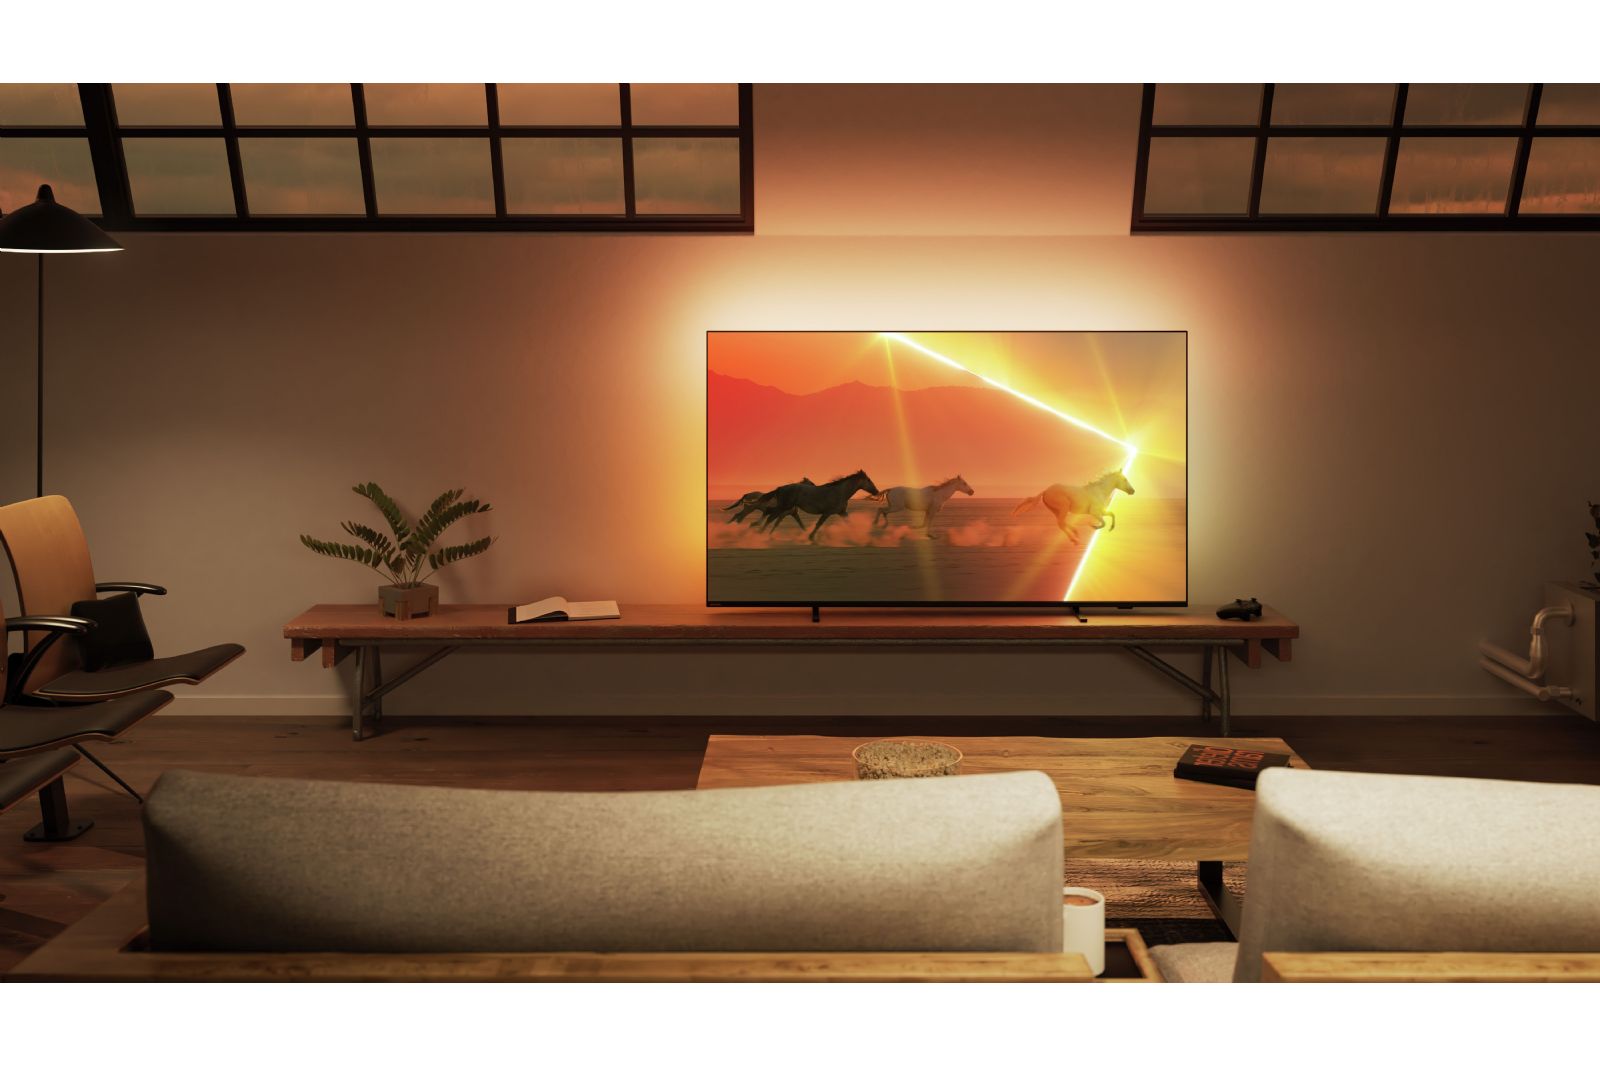 TV-apparater Philips 55PML9008/12 The Xtra 4K Ambilight-TV